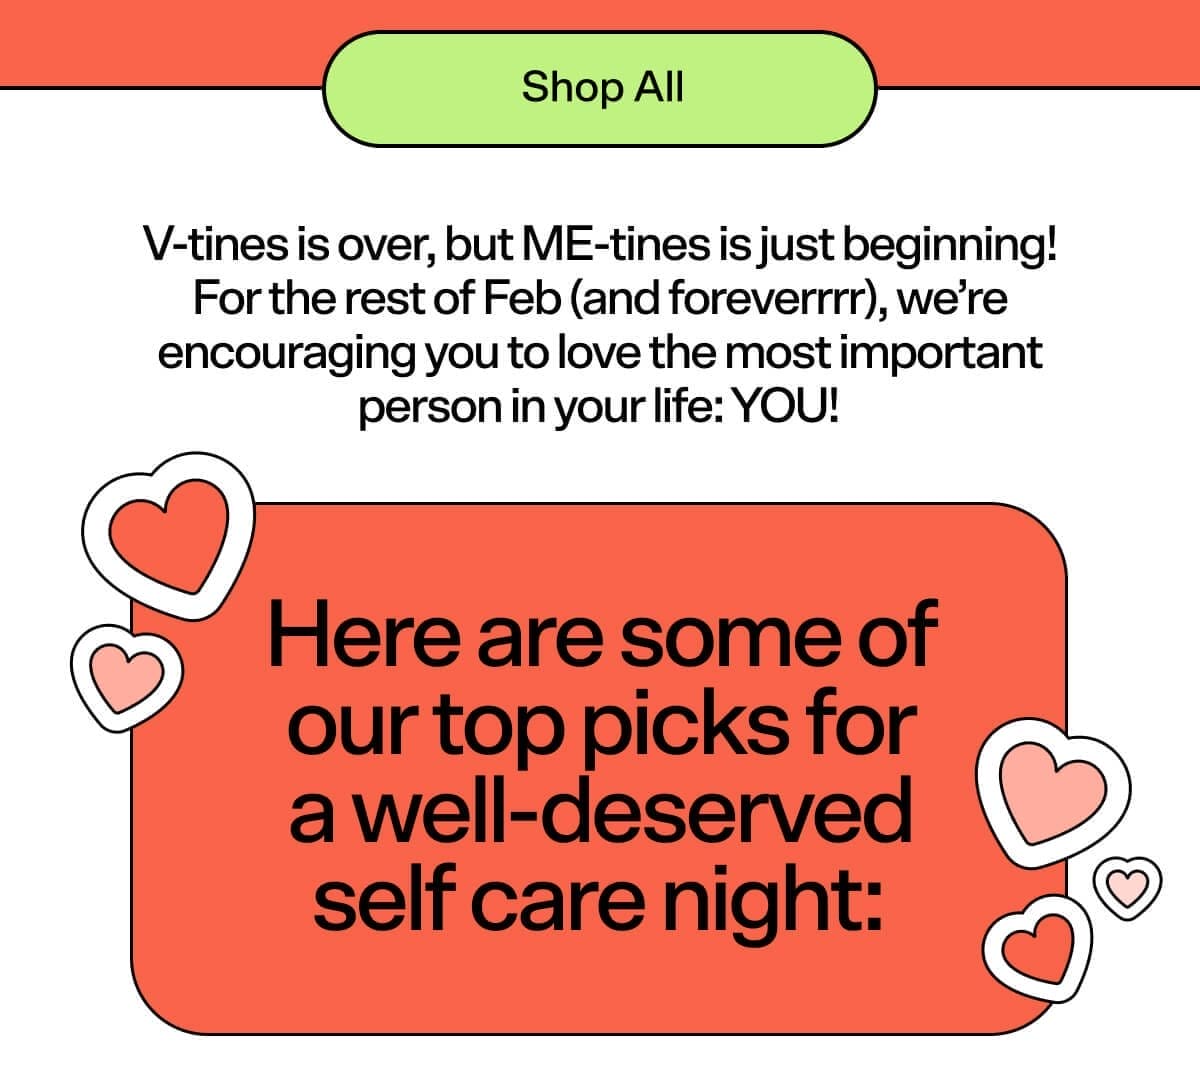 Shop Bubble V-tines is over, but ME-tines is just beginning! For the rest of Feb (and foreverrrr), we’re encouraging you to love the most important person in your life: YOU! Here are some of our top picks for a well-deserved self care night: